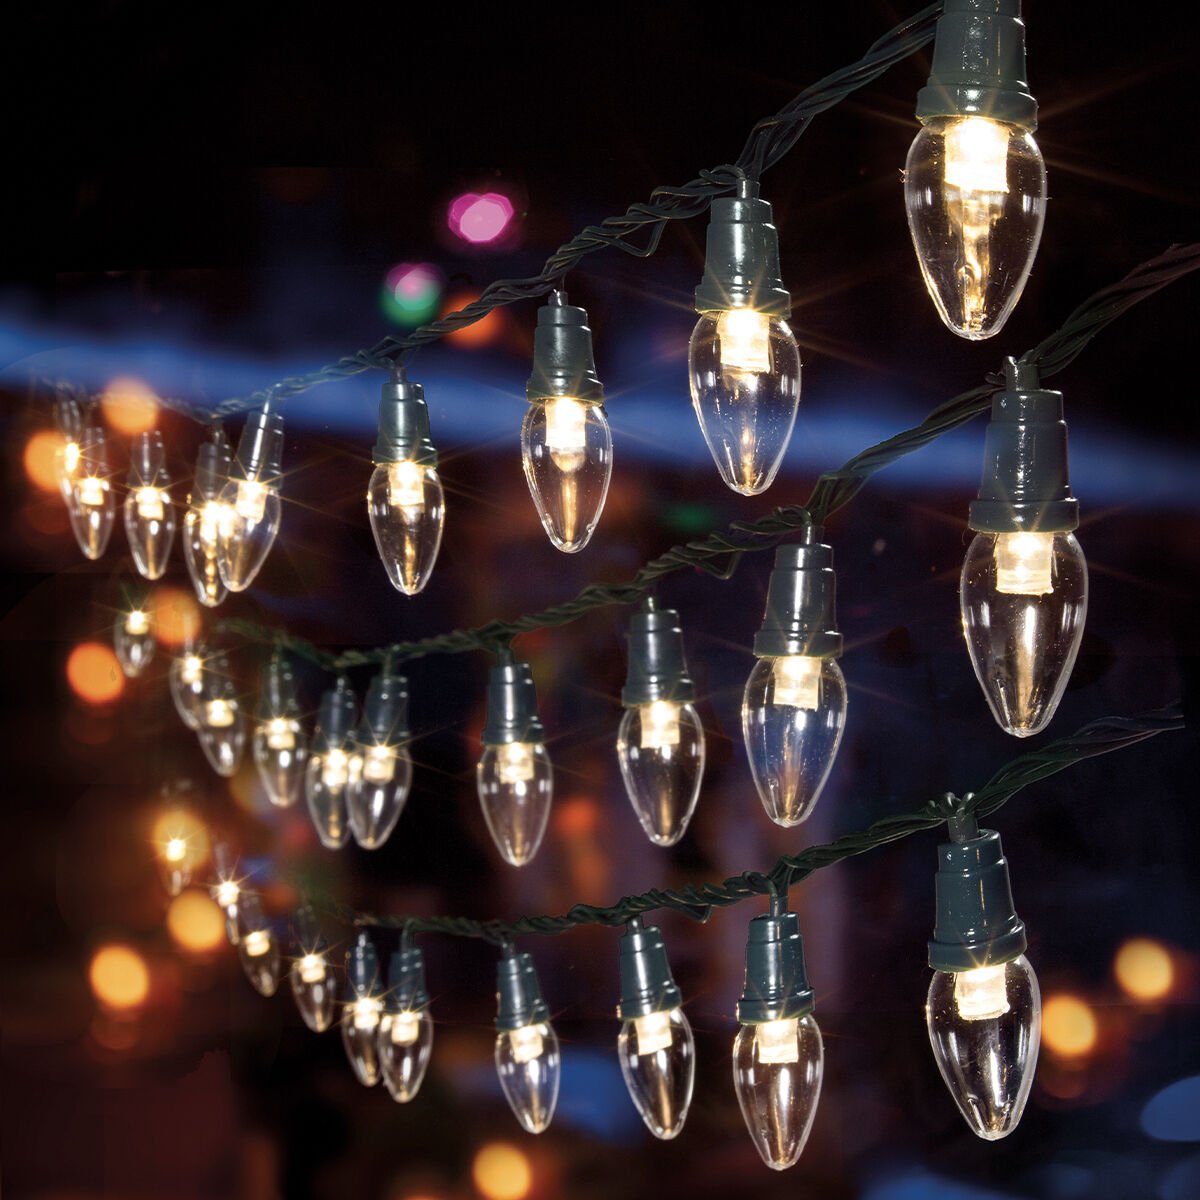 12m Outdoor C6 Christmas String Lights, Warm White LEDs image 3